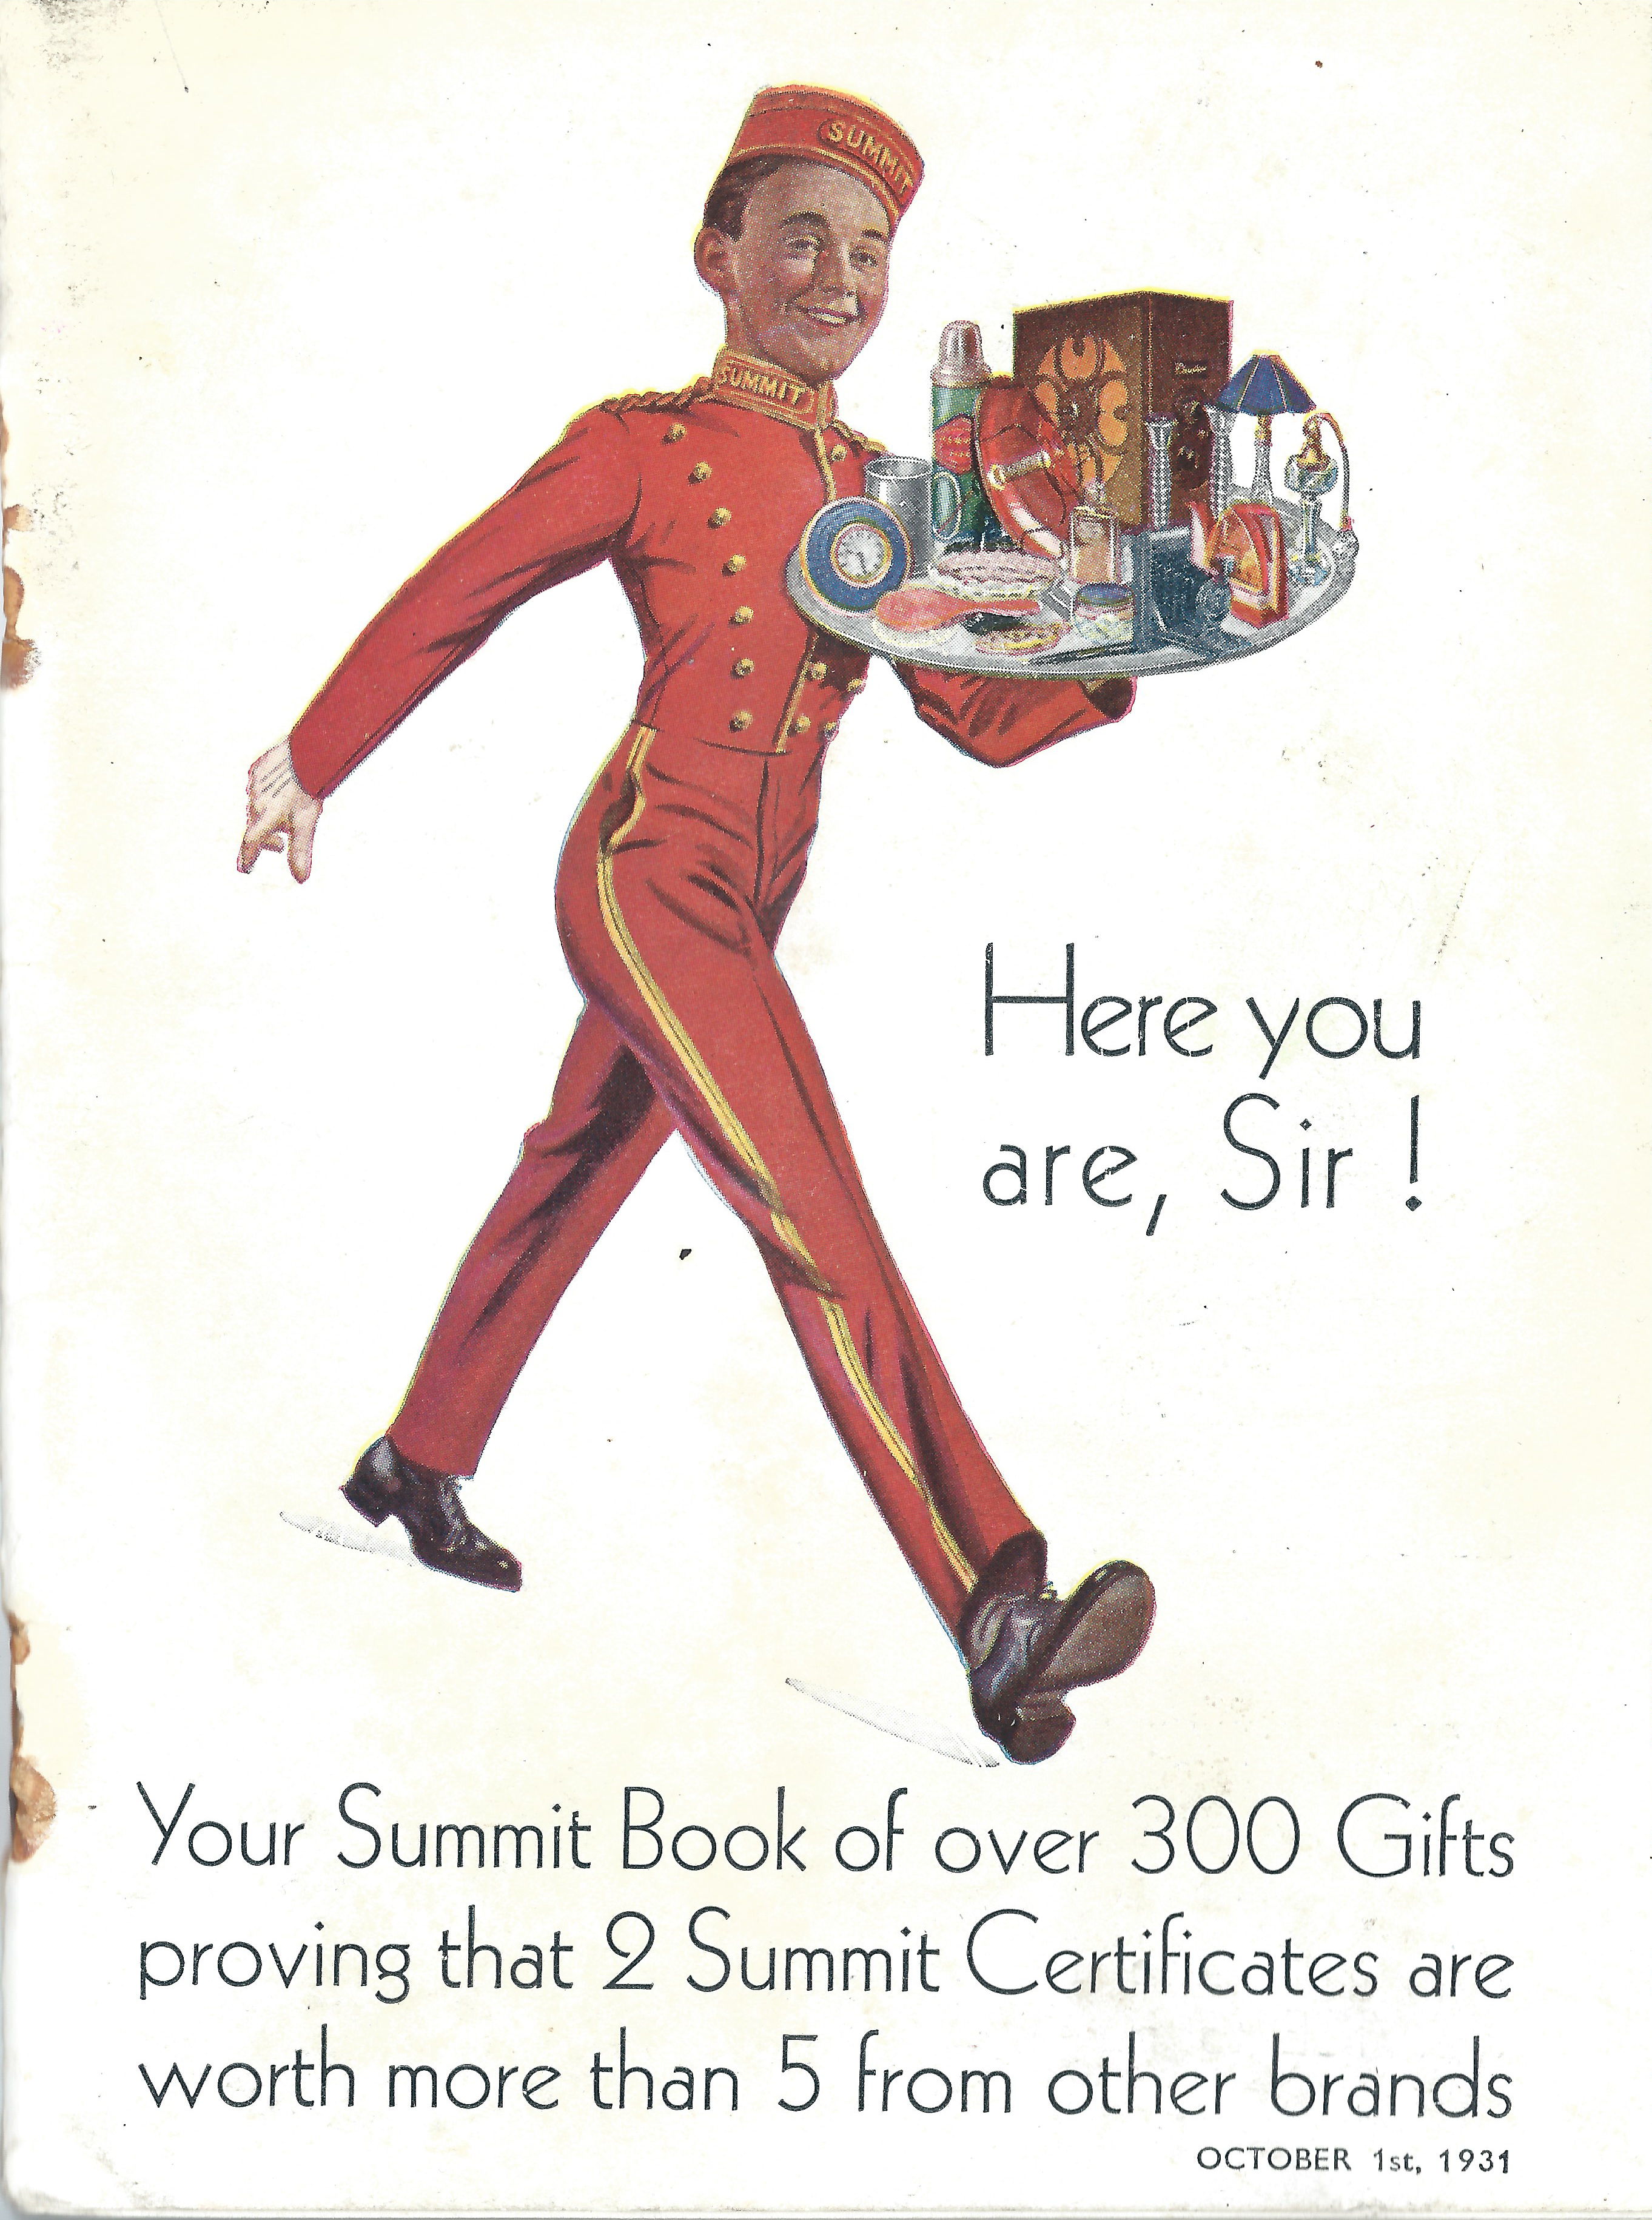 Image showing the front cover of the 1931 Summit gift catalogue